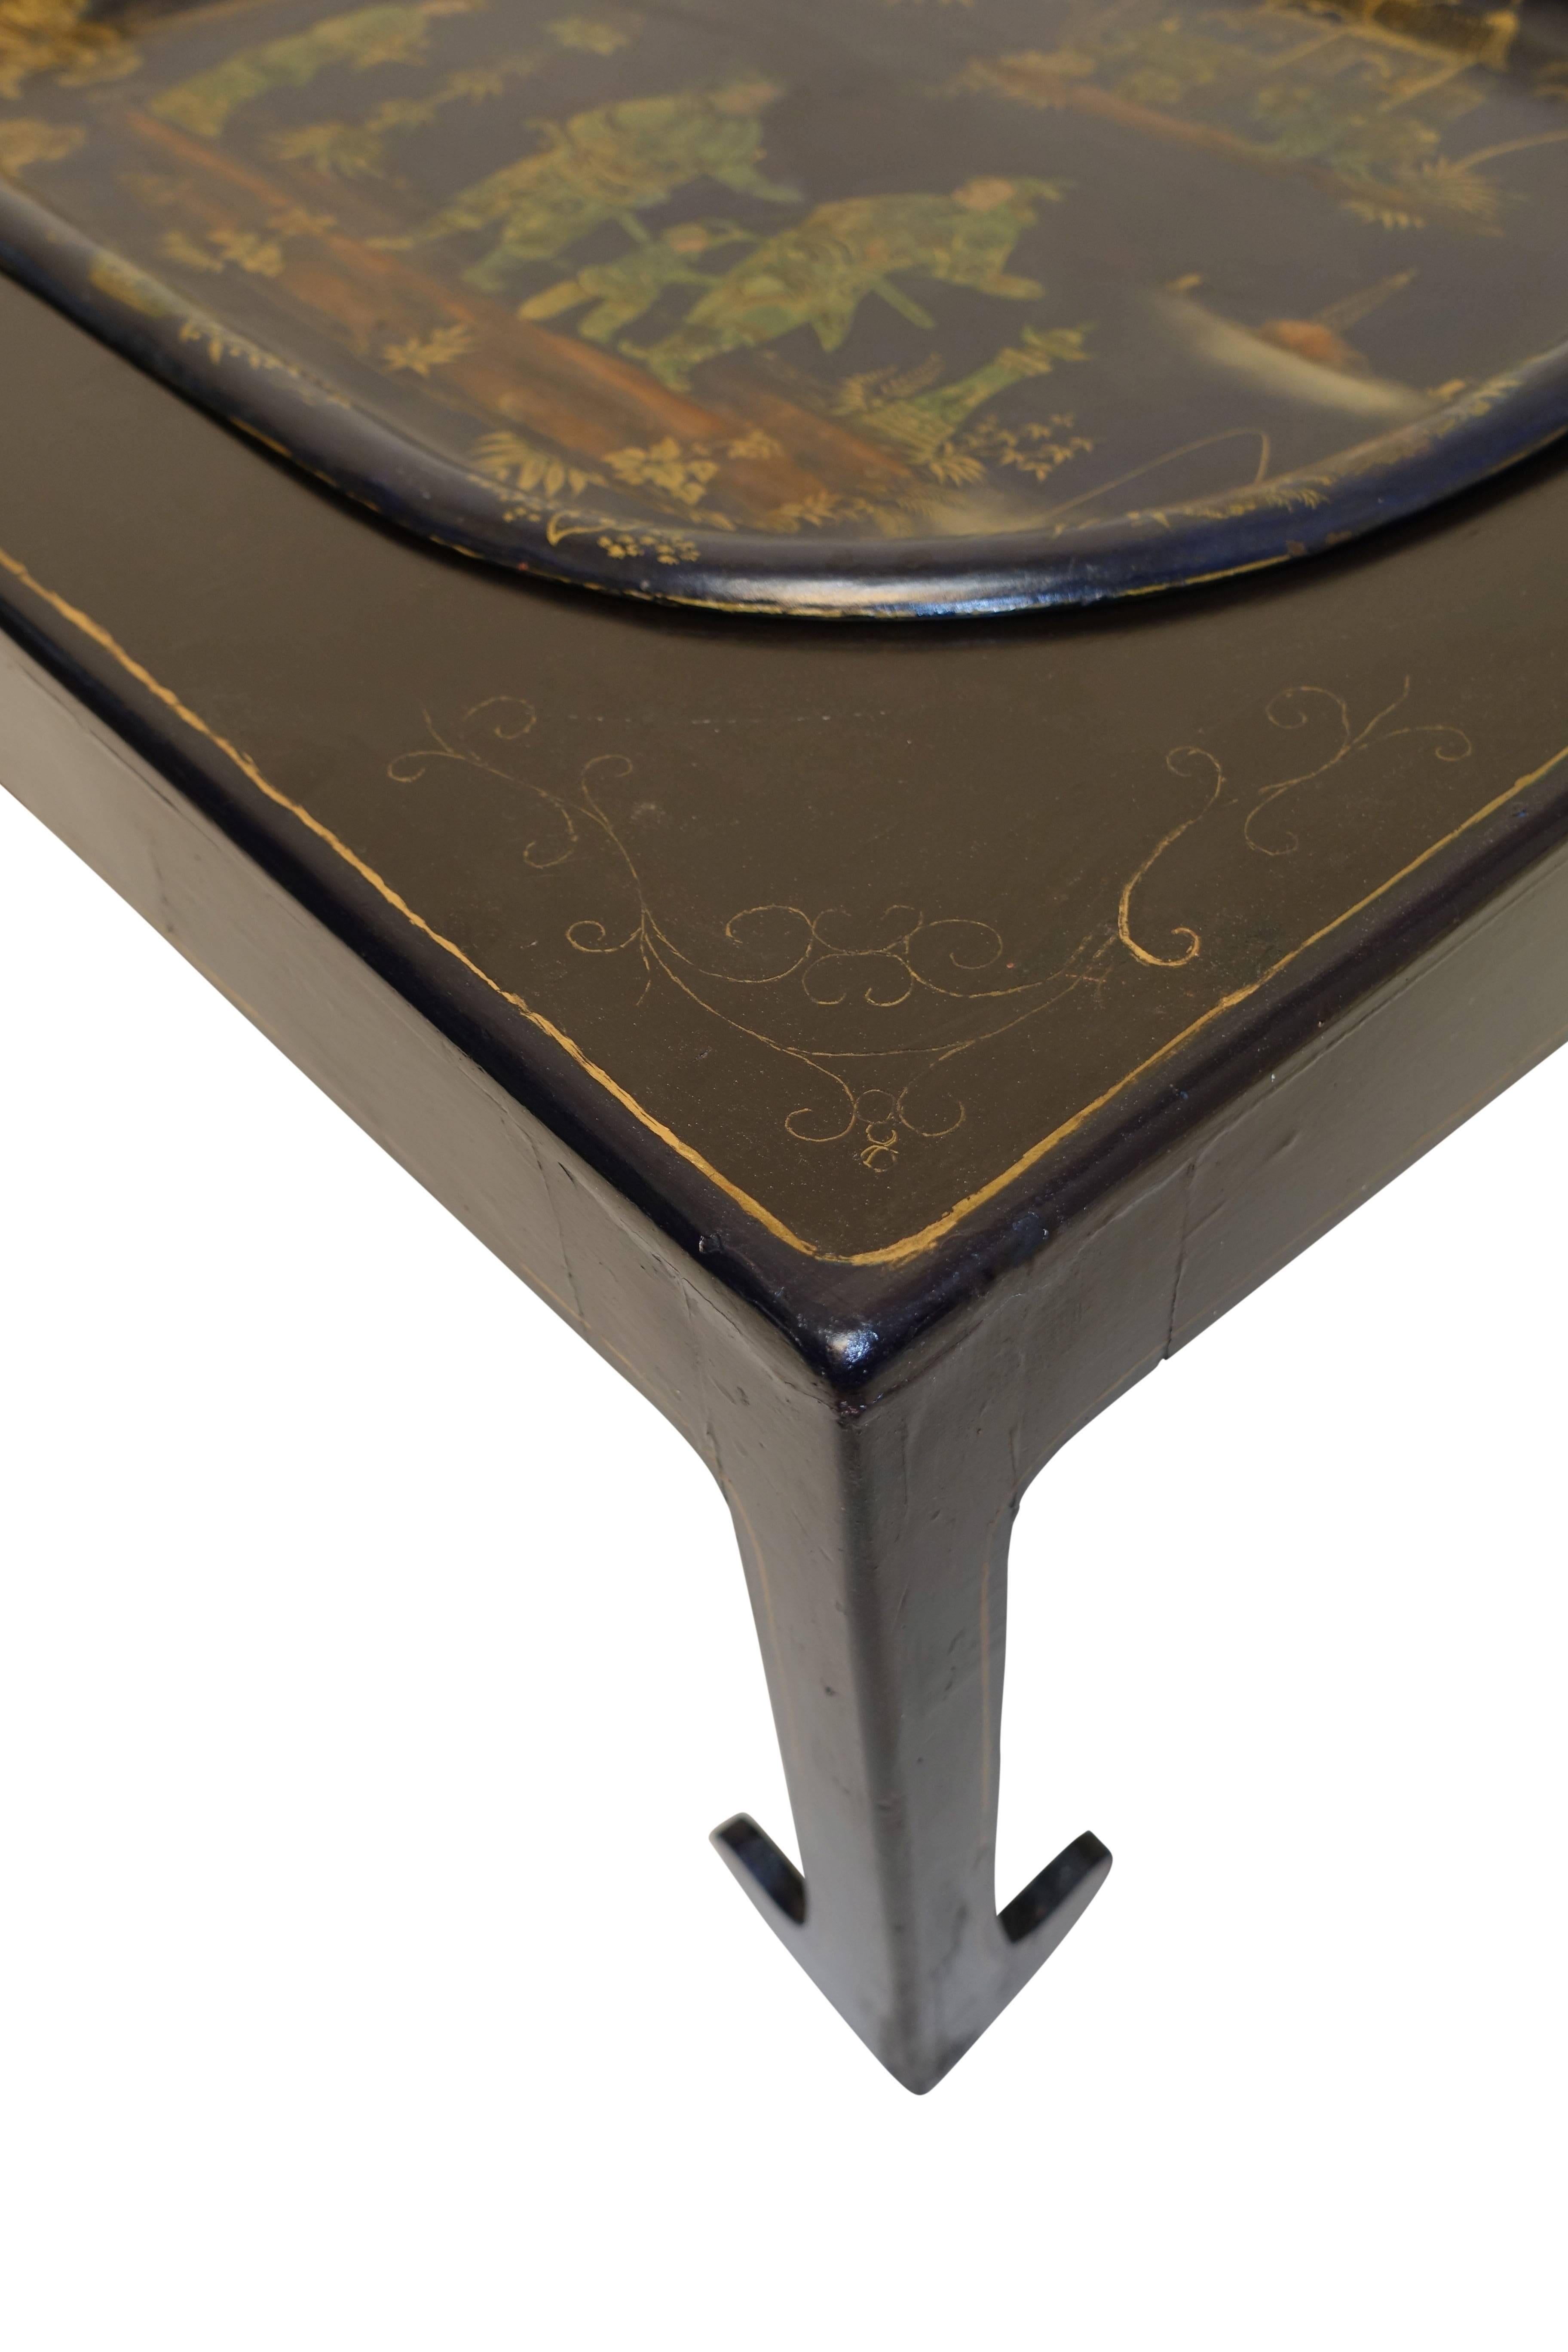 Tin Navy Blue Tole Tray Table with Black Asian Style Stand, England, 19th Century